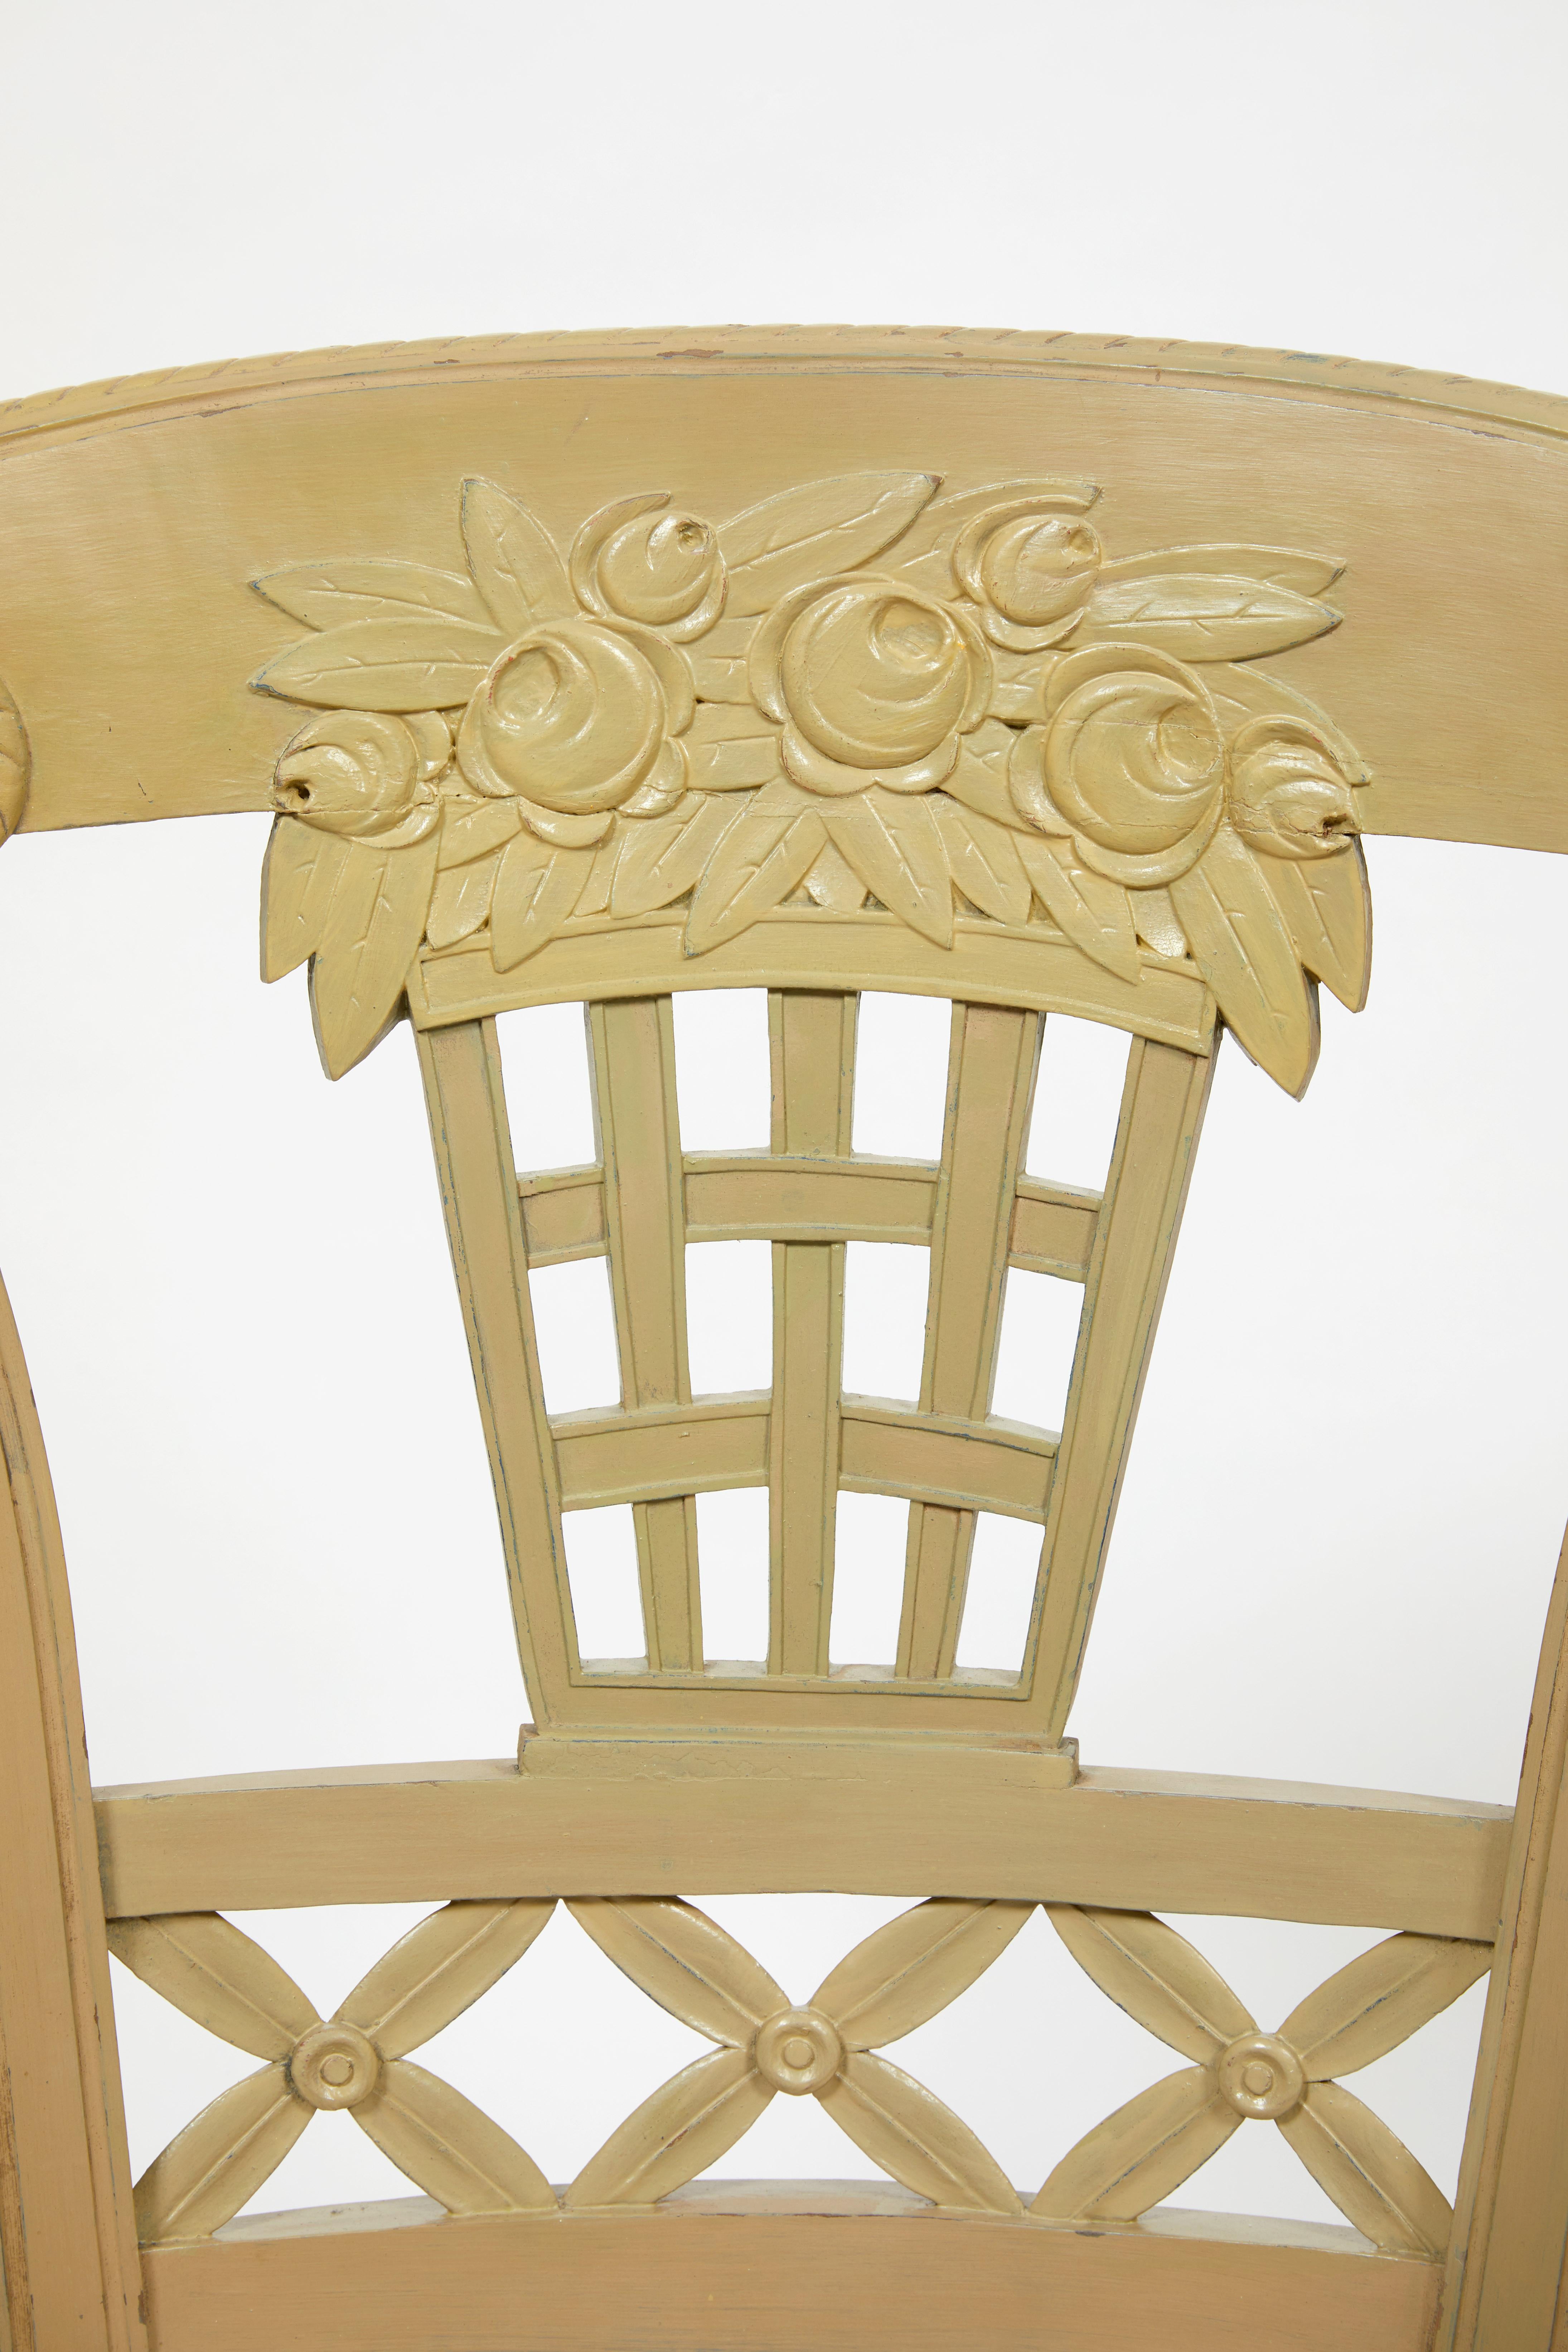 The very Classic form comes from Provençal furniture of the 18th century. The folders are decorated in the center, finely carved with a basket openwork receiving flowers. The edge of the headbands is embellished with a cordelière pattern commanding